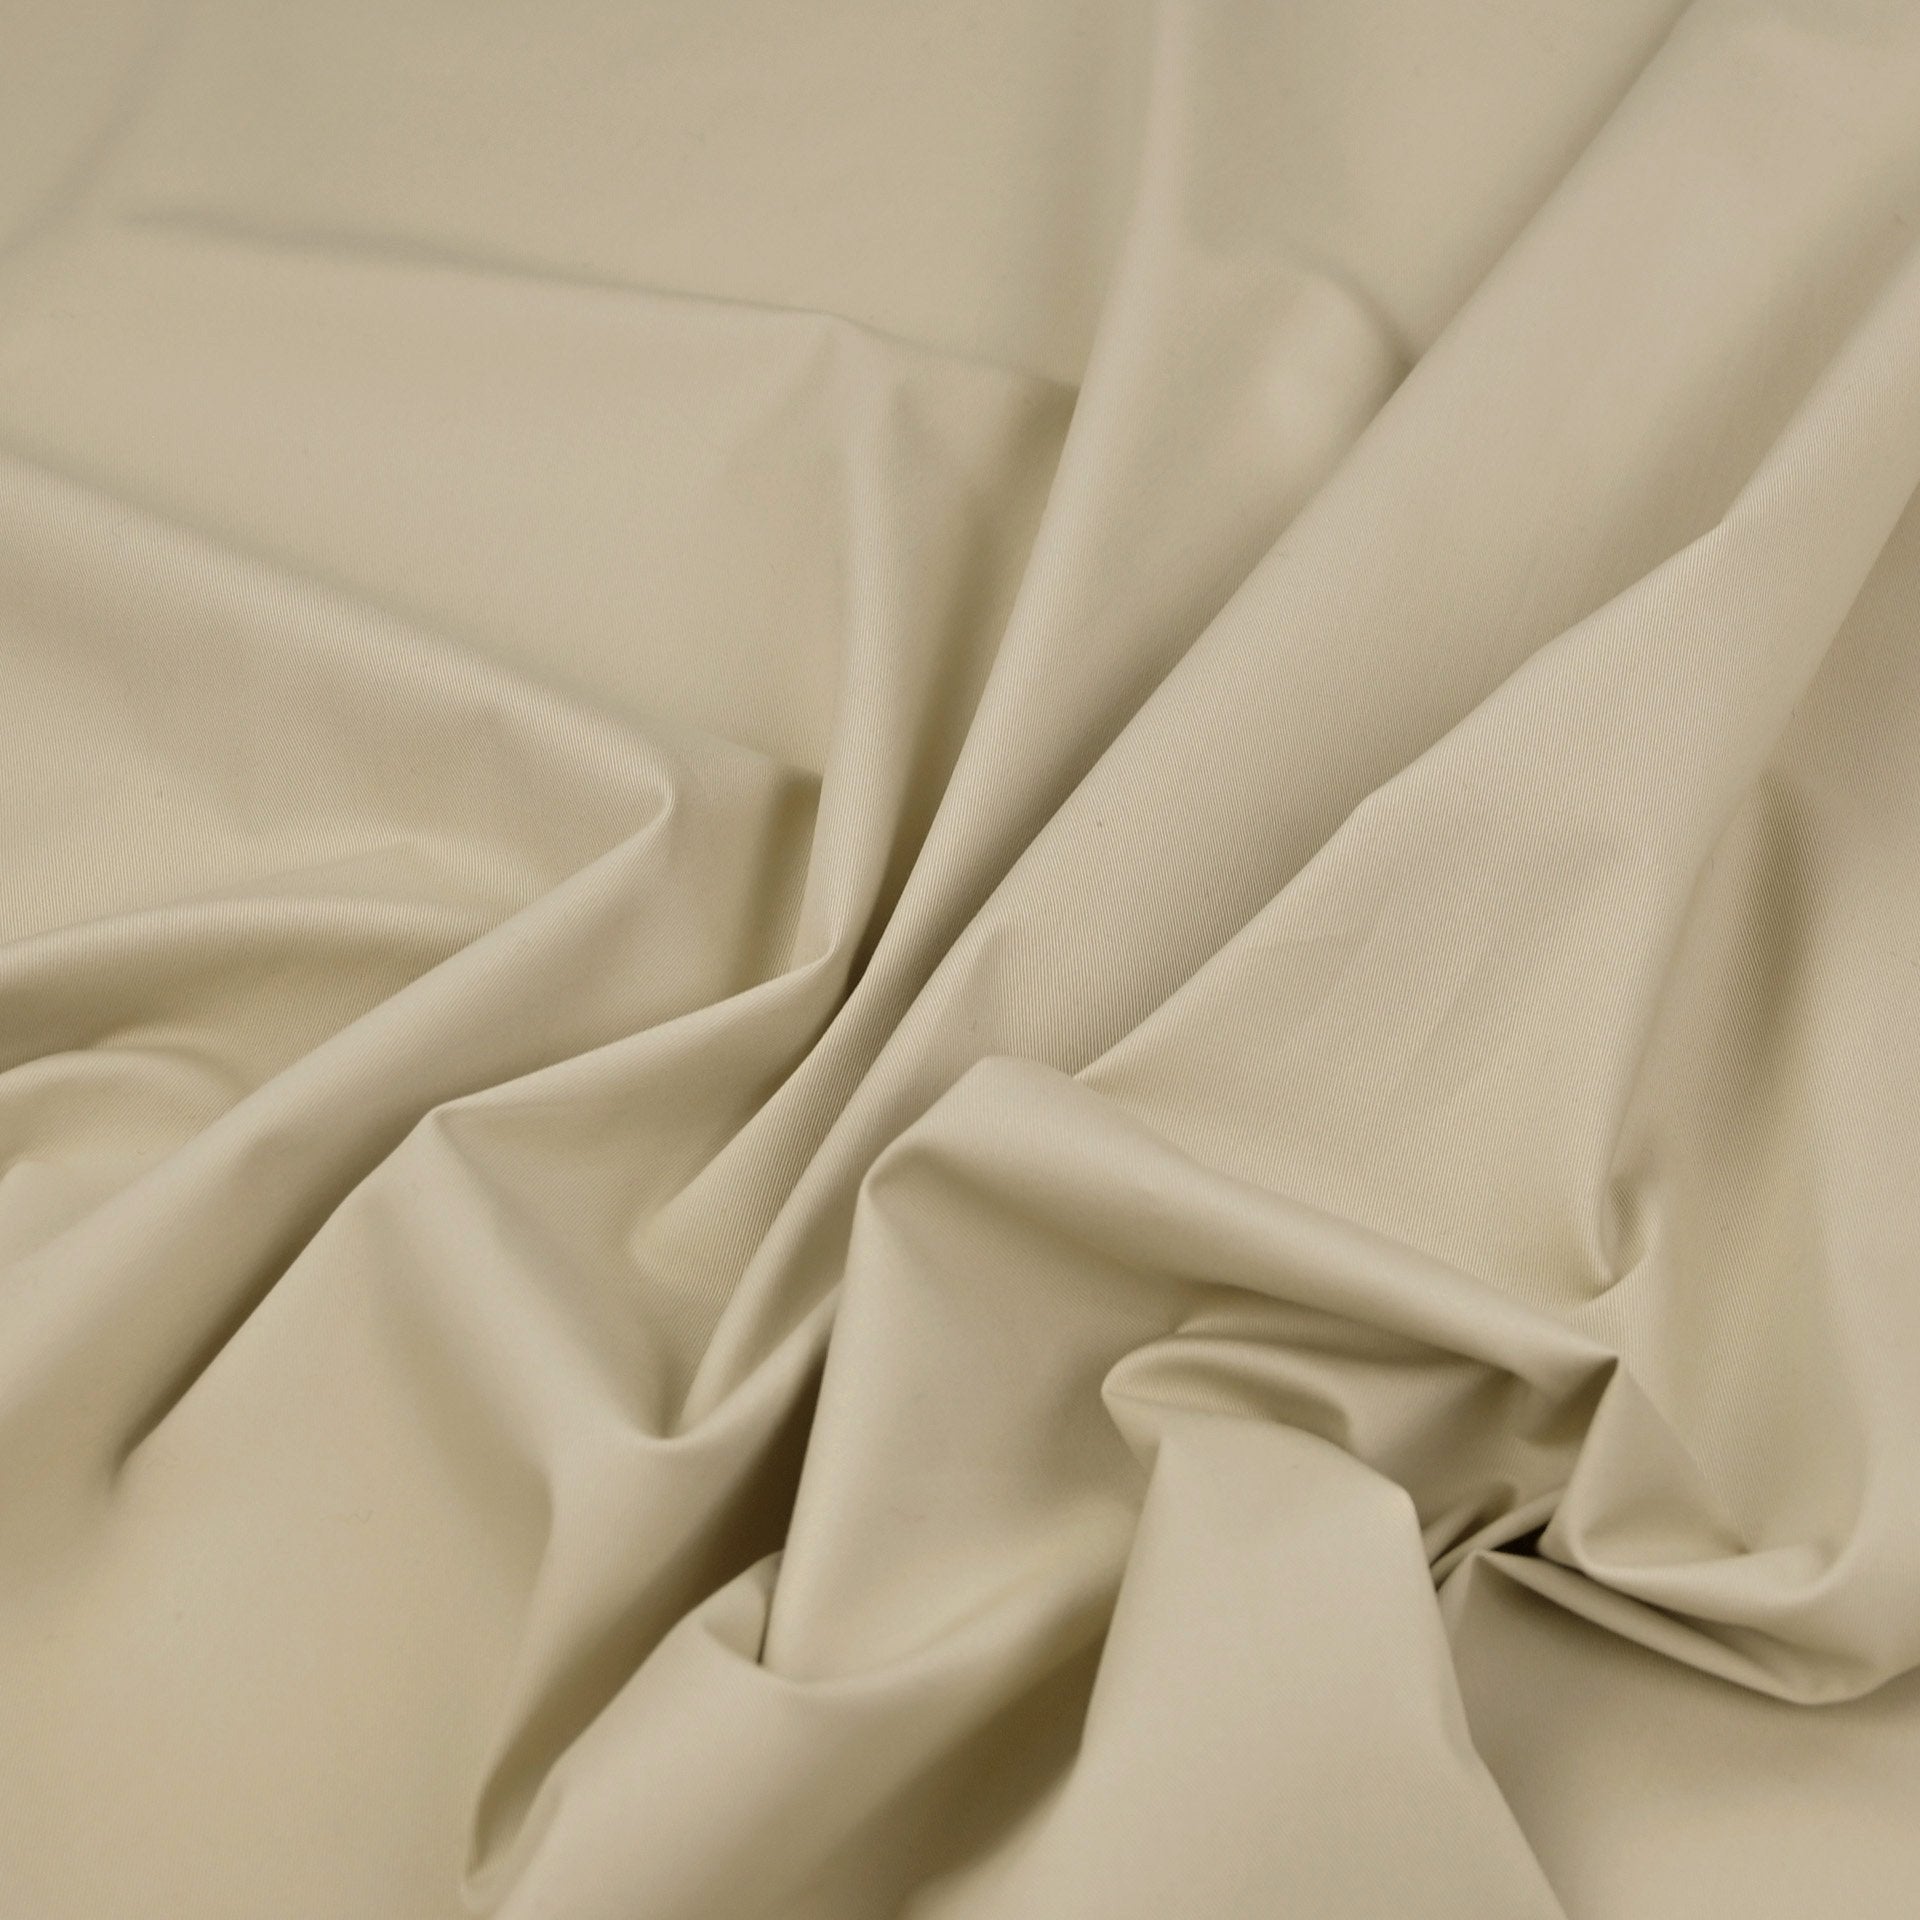 Oyster Stretch Cotton Fabric 97040